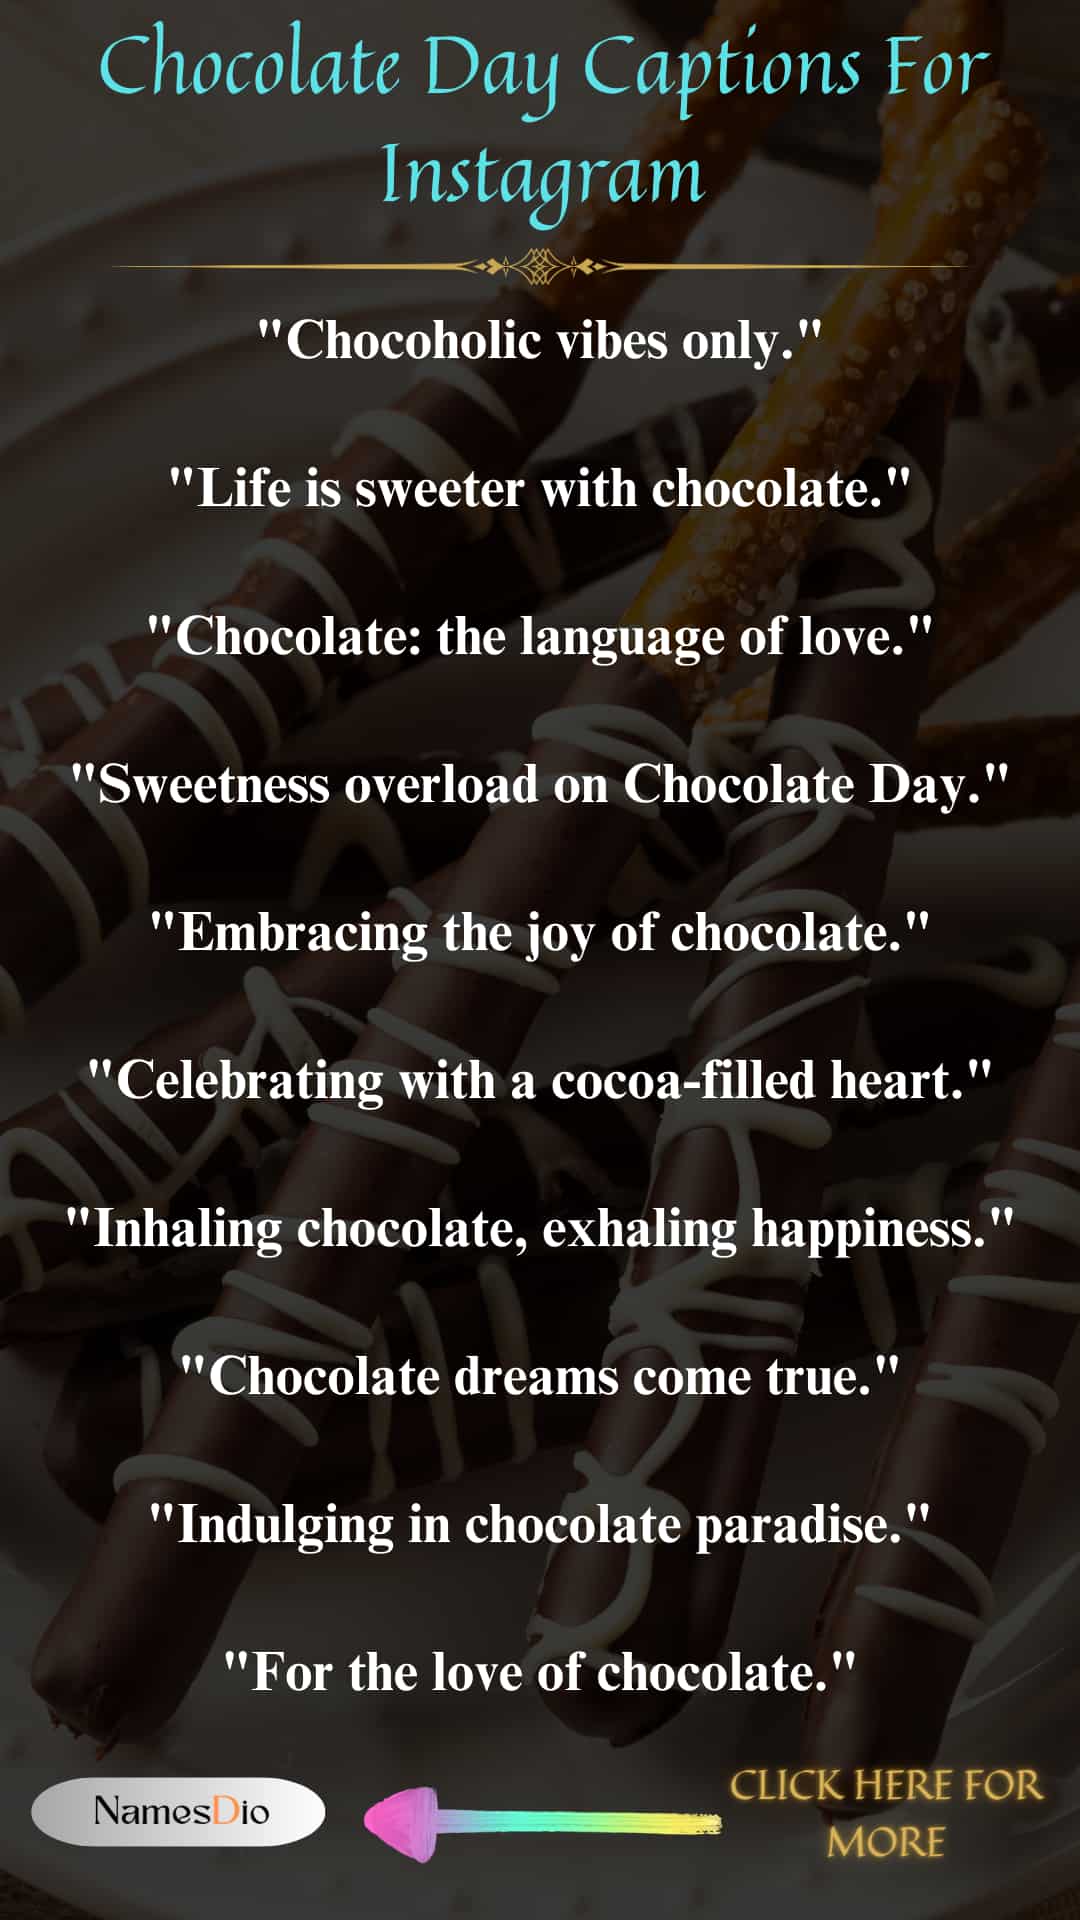 Chocolate-Day-Captions-For-Instagram